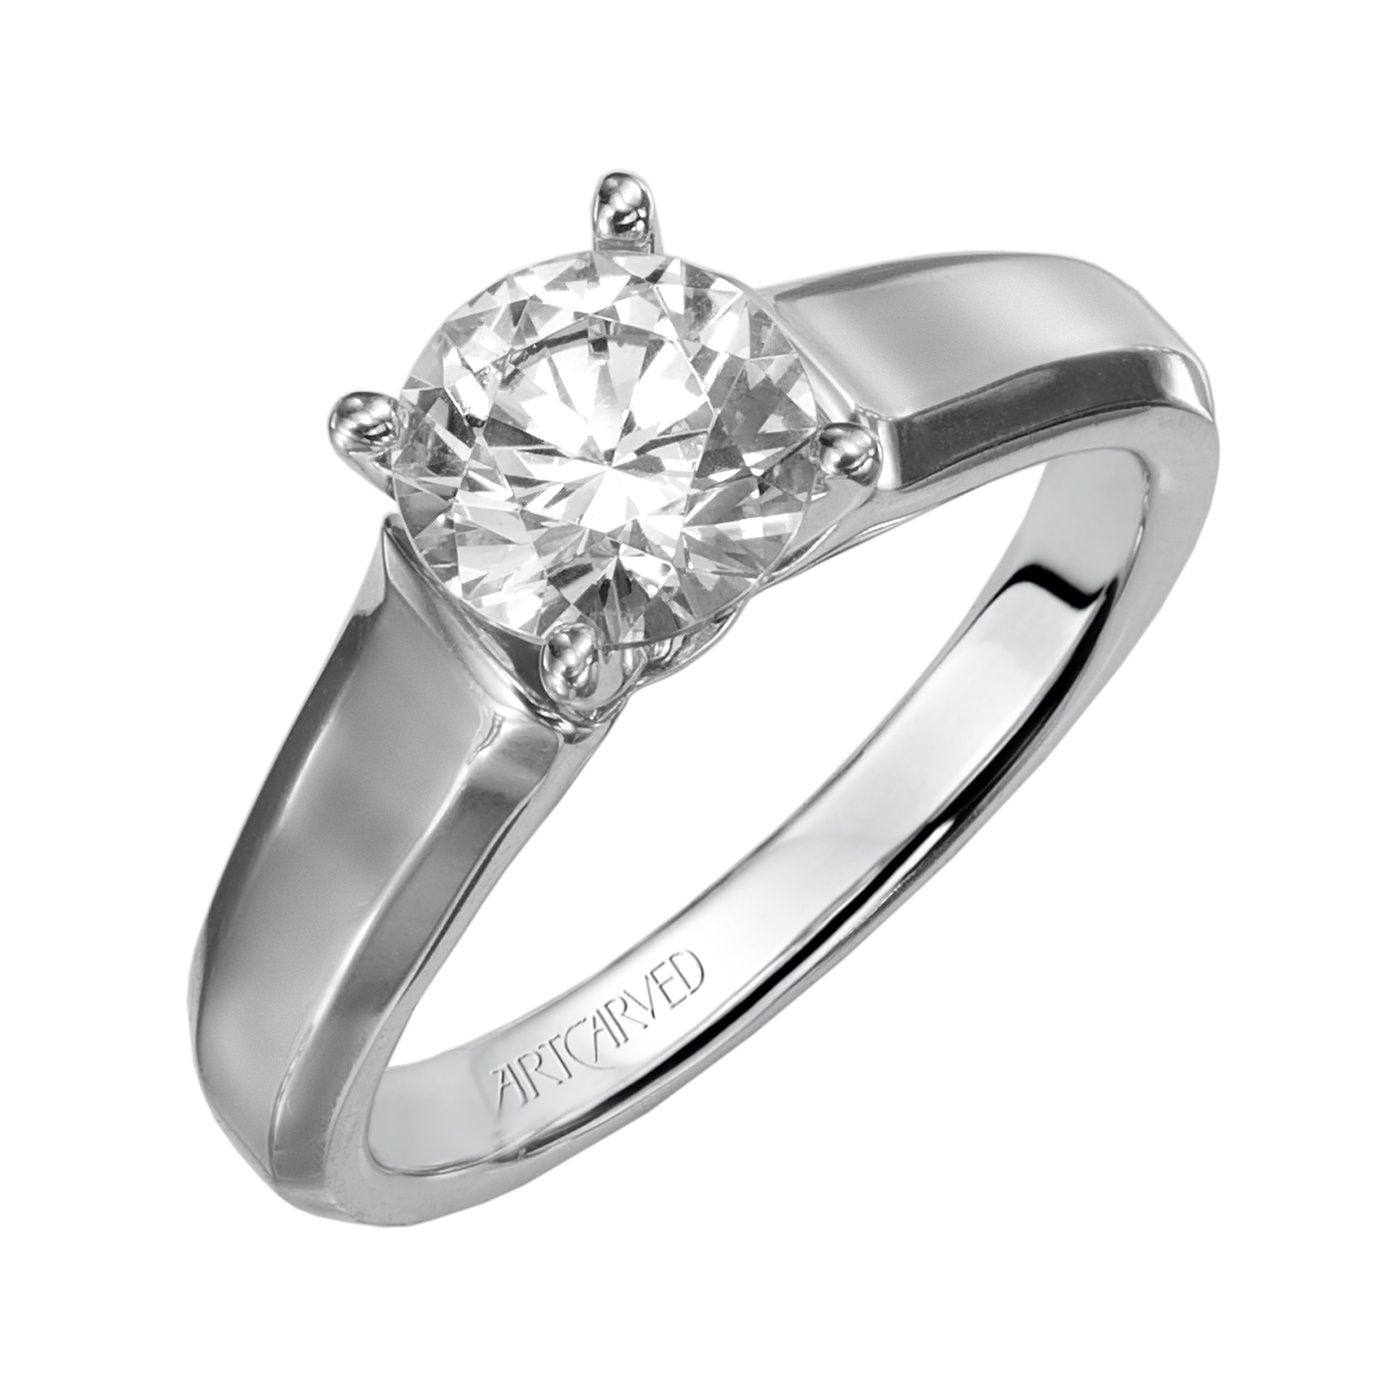 14kt White Gold and Diamond Engagement Ring by ArtCarved